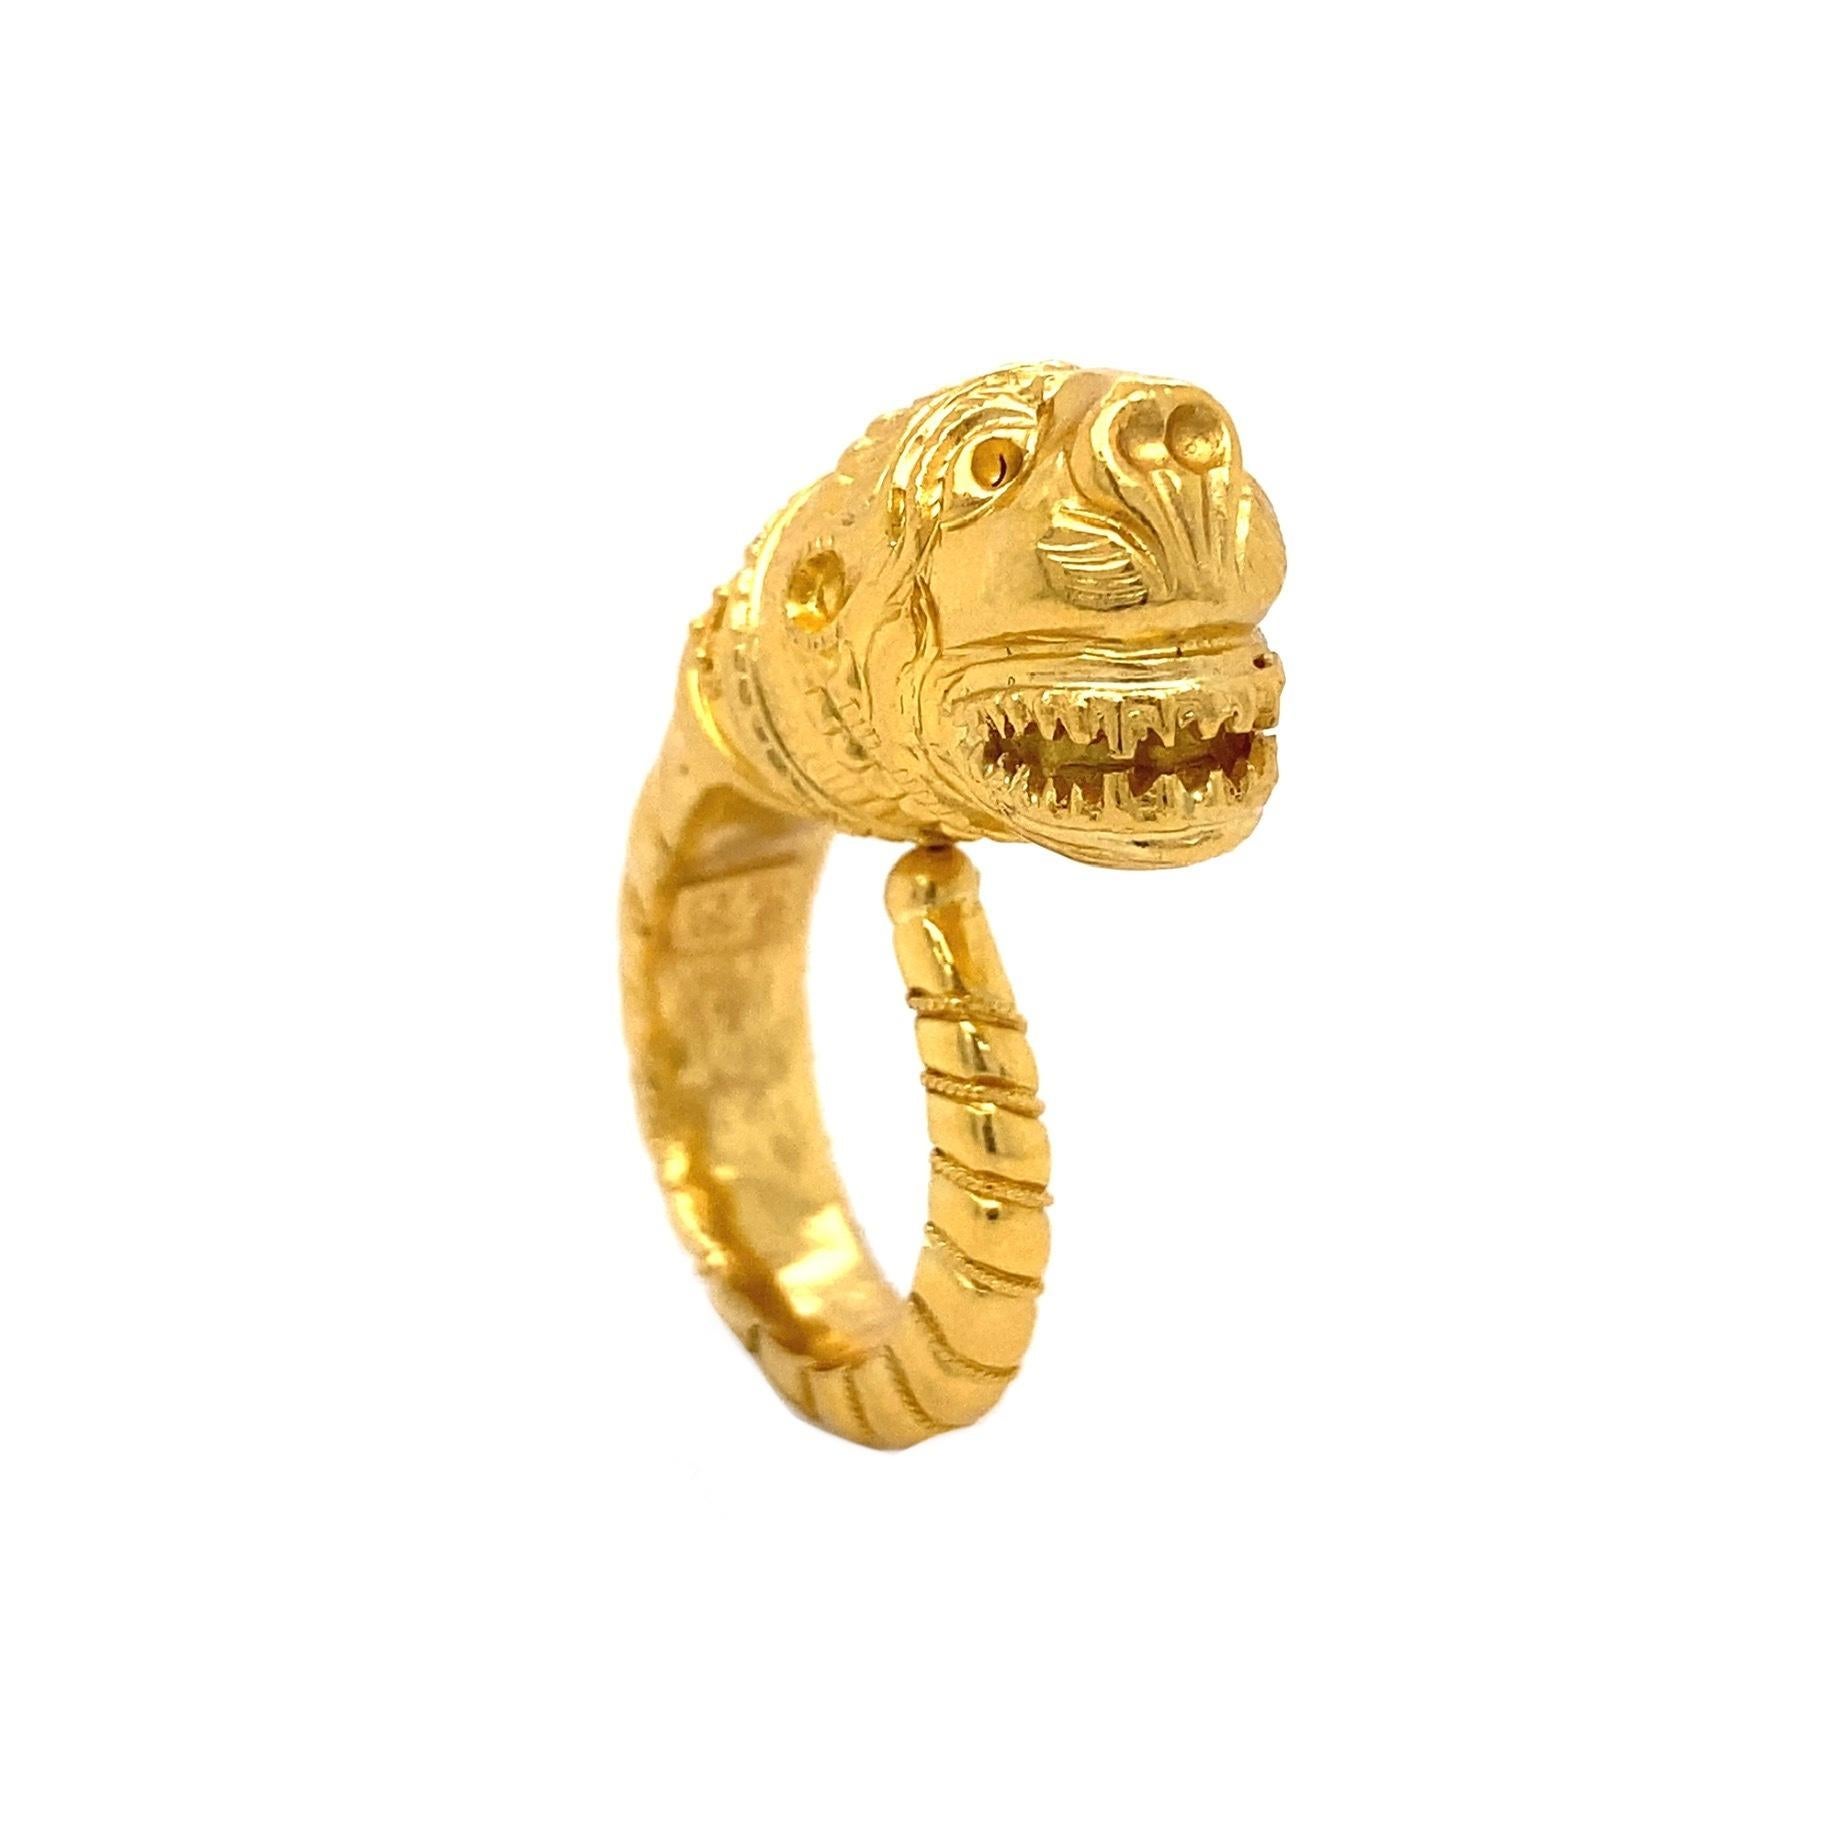 Contemporary Lalaounis Iconic Ornate Dragon Gold Ring Estate Fine Jewelry